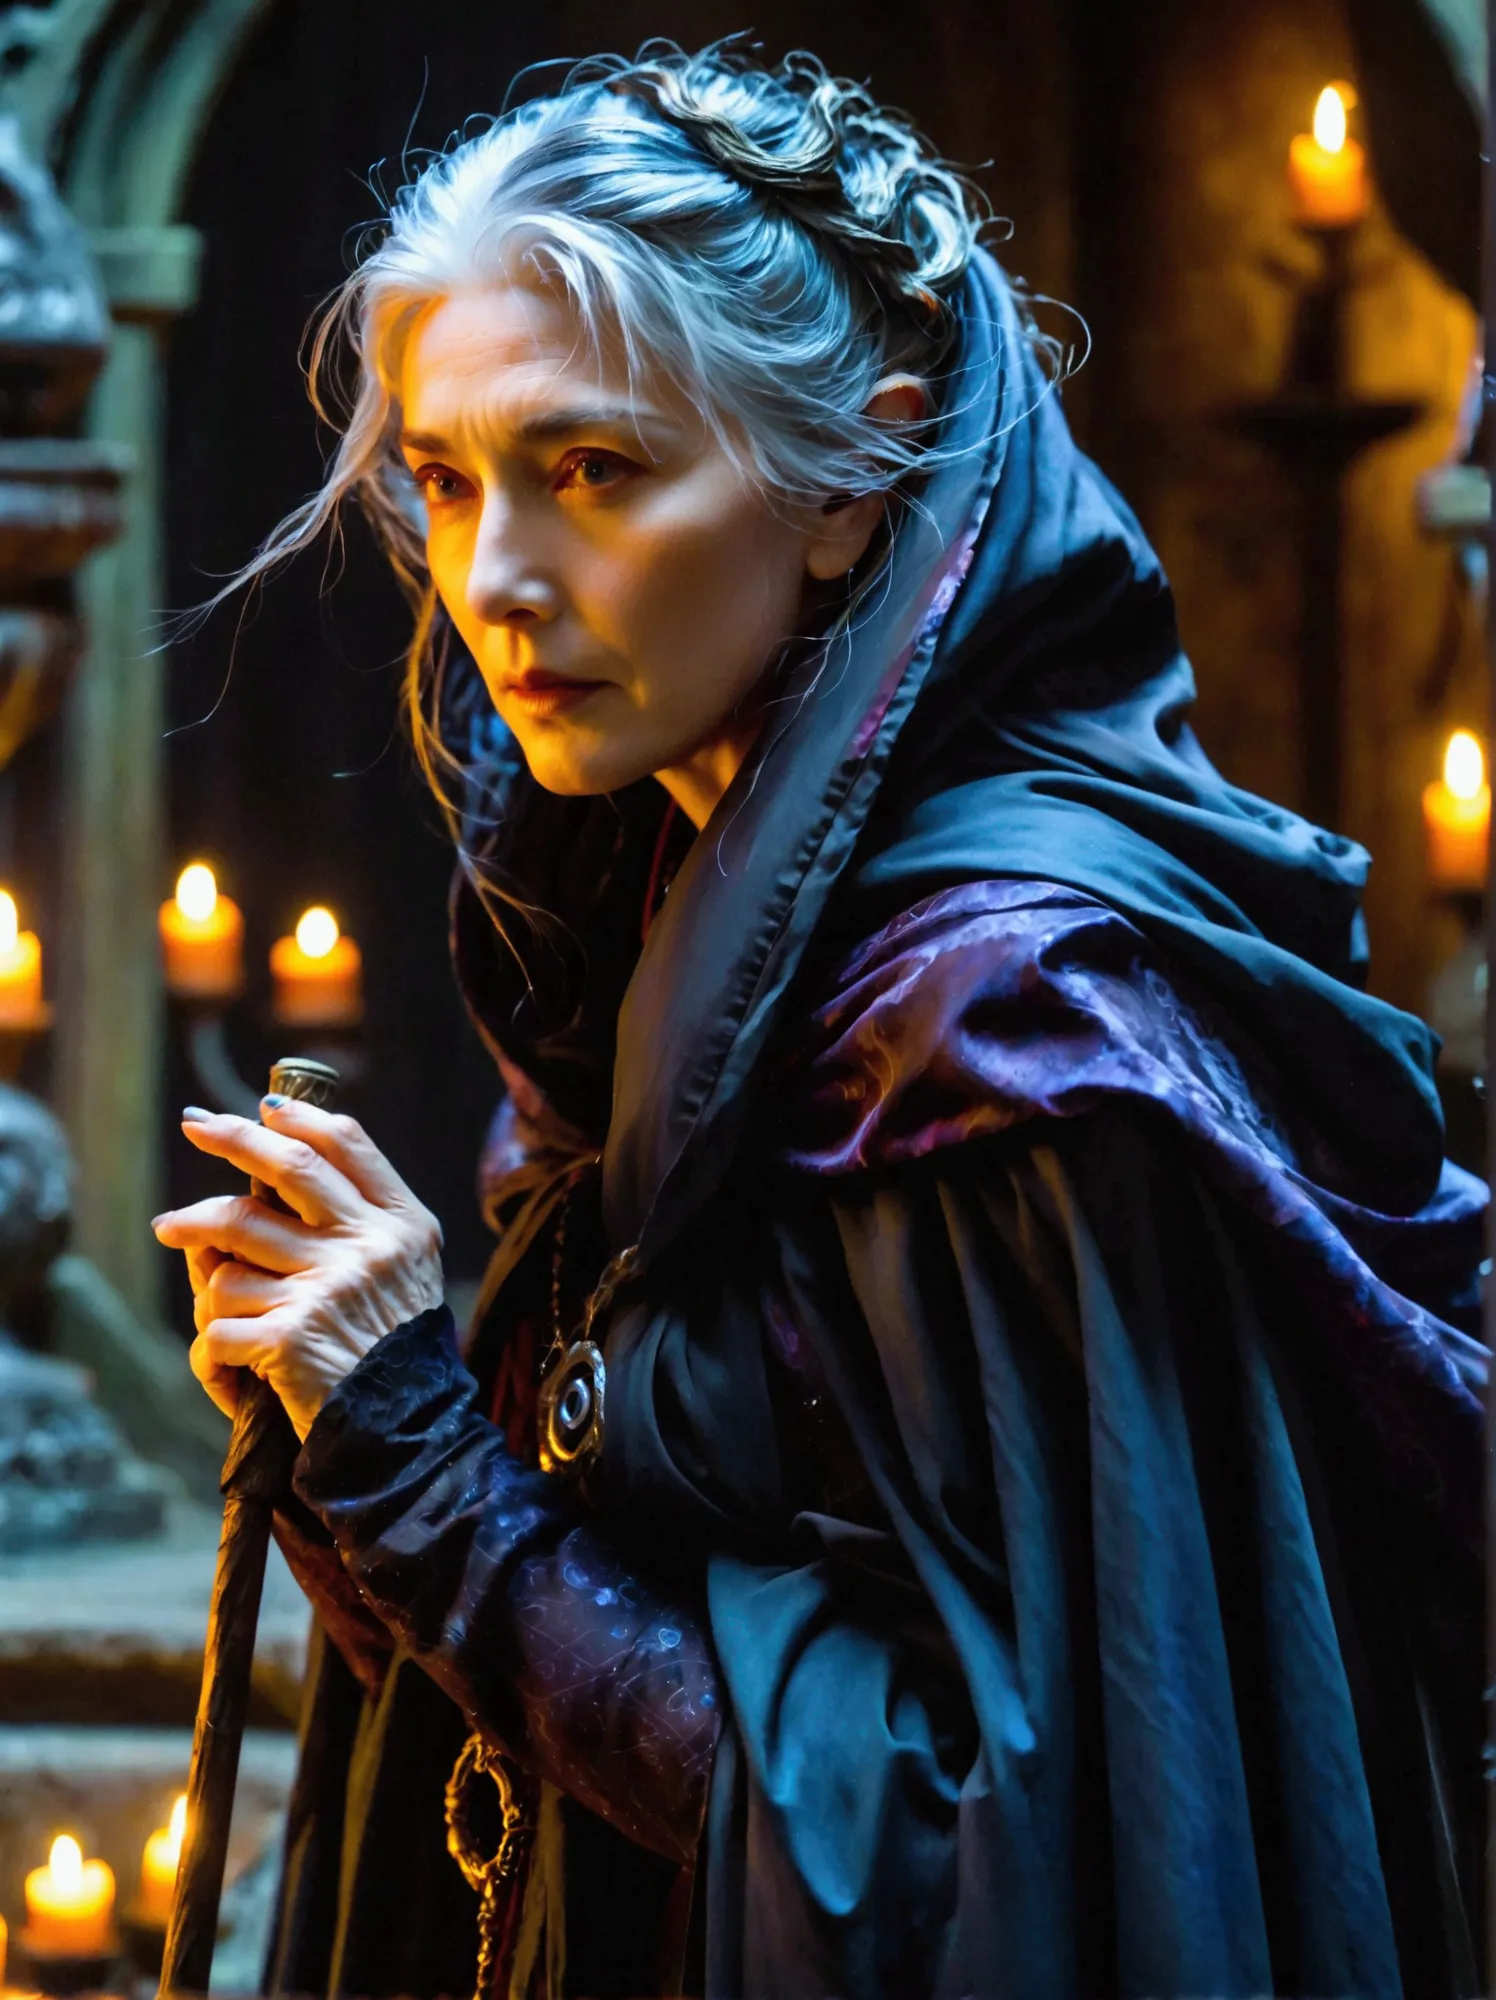 Visualize a scene with an aged female sorceress as the main character. She has an ominous aura around her, hinting at her malevo...